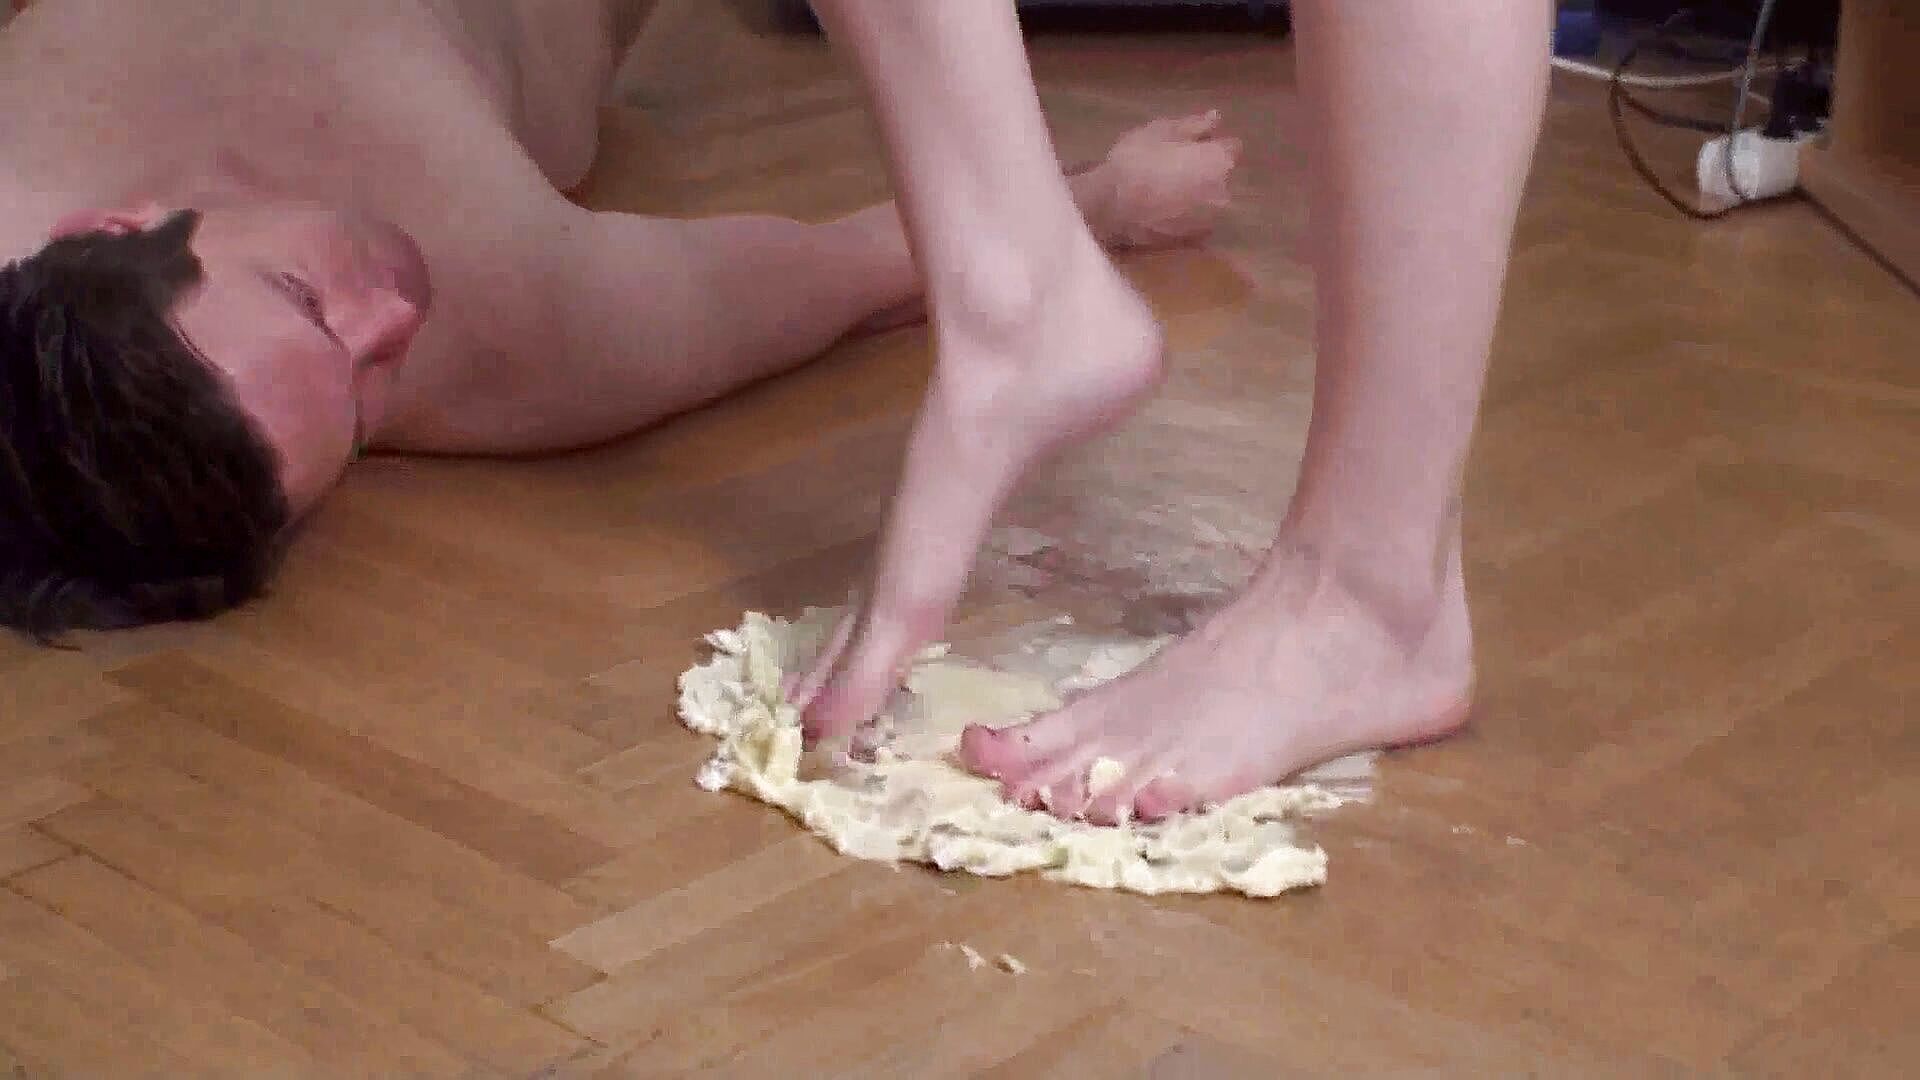 Trampling food and then putting feet in slave's mouth--Foot Girls